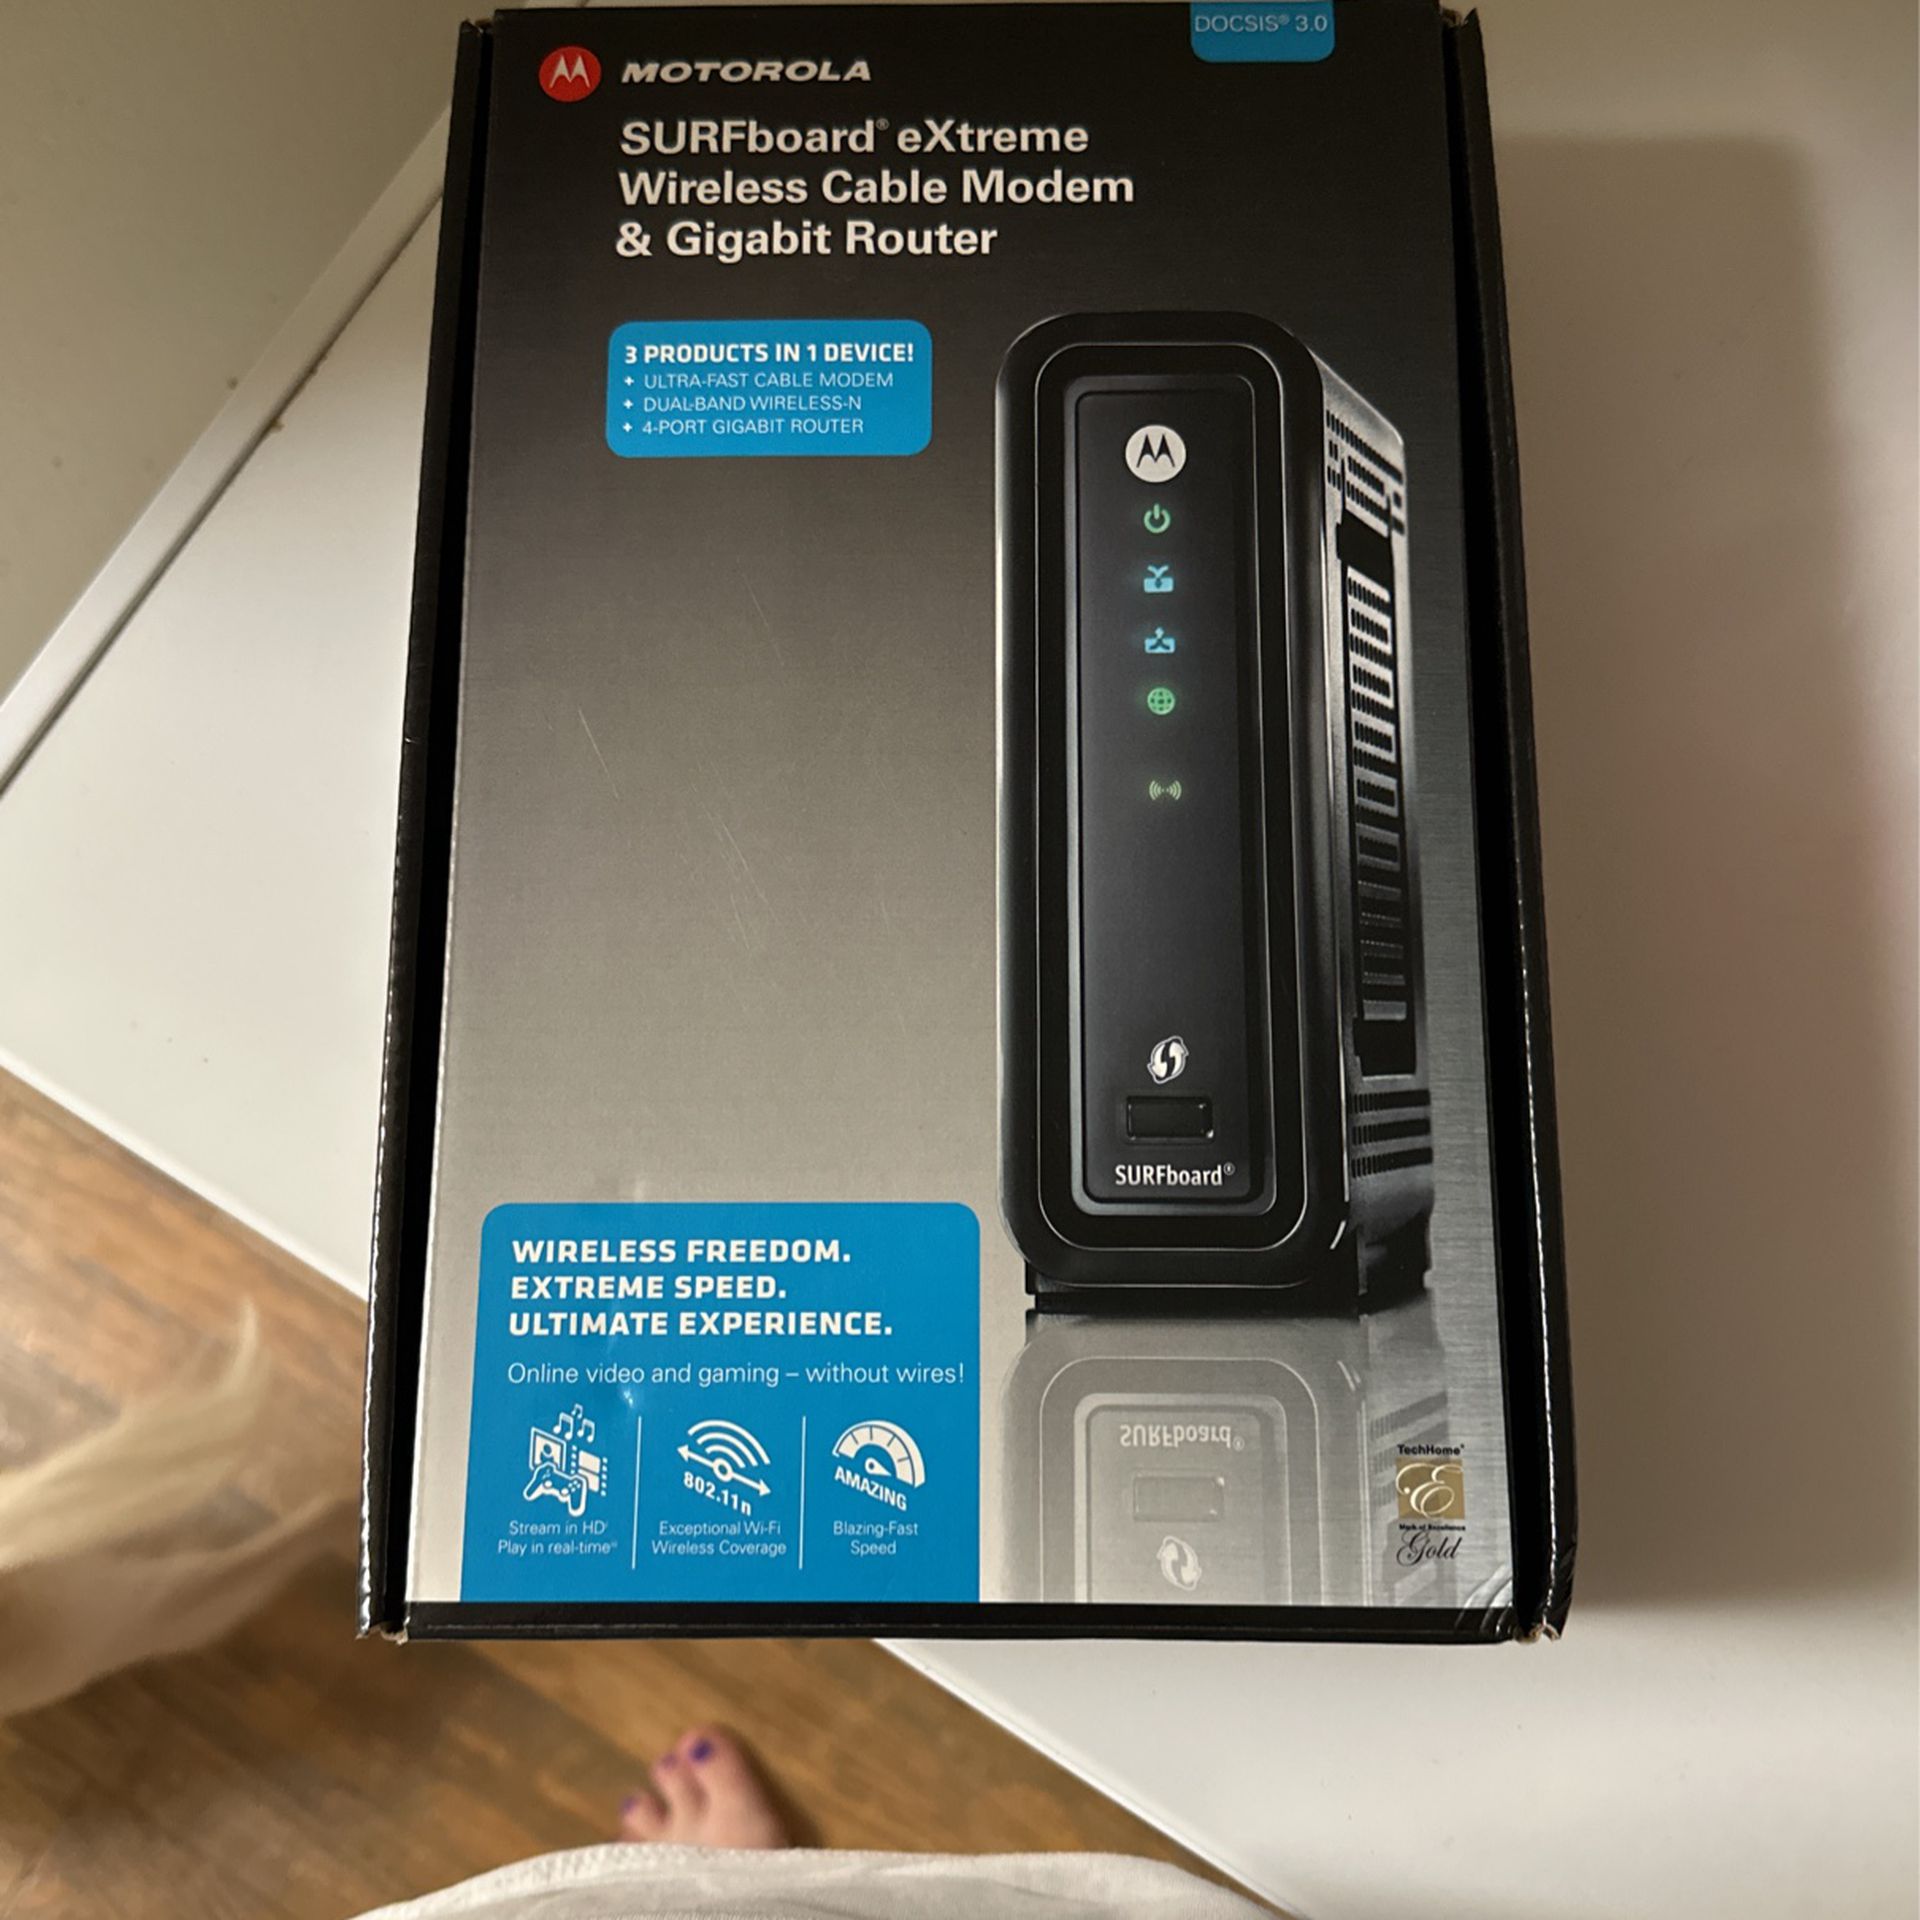 Motorola Surfboard Wireless Cable Modem And Gigabit Router